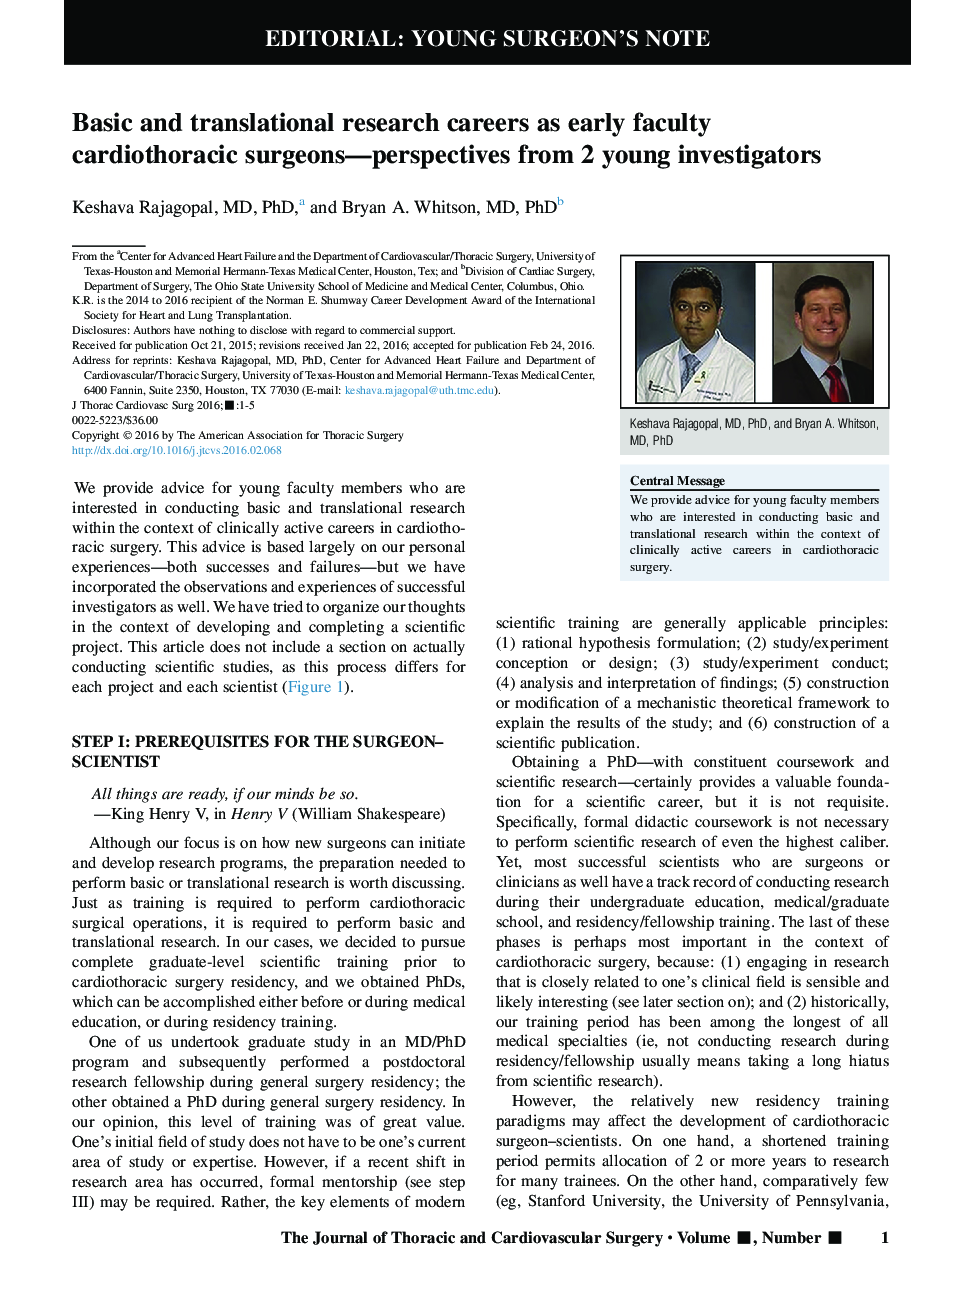 Basic and translational research careers as early faculty cardiothoracic surgeons-perspectives from 2 young investigators